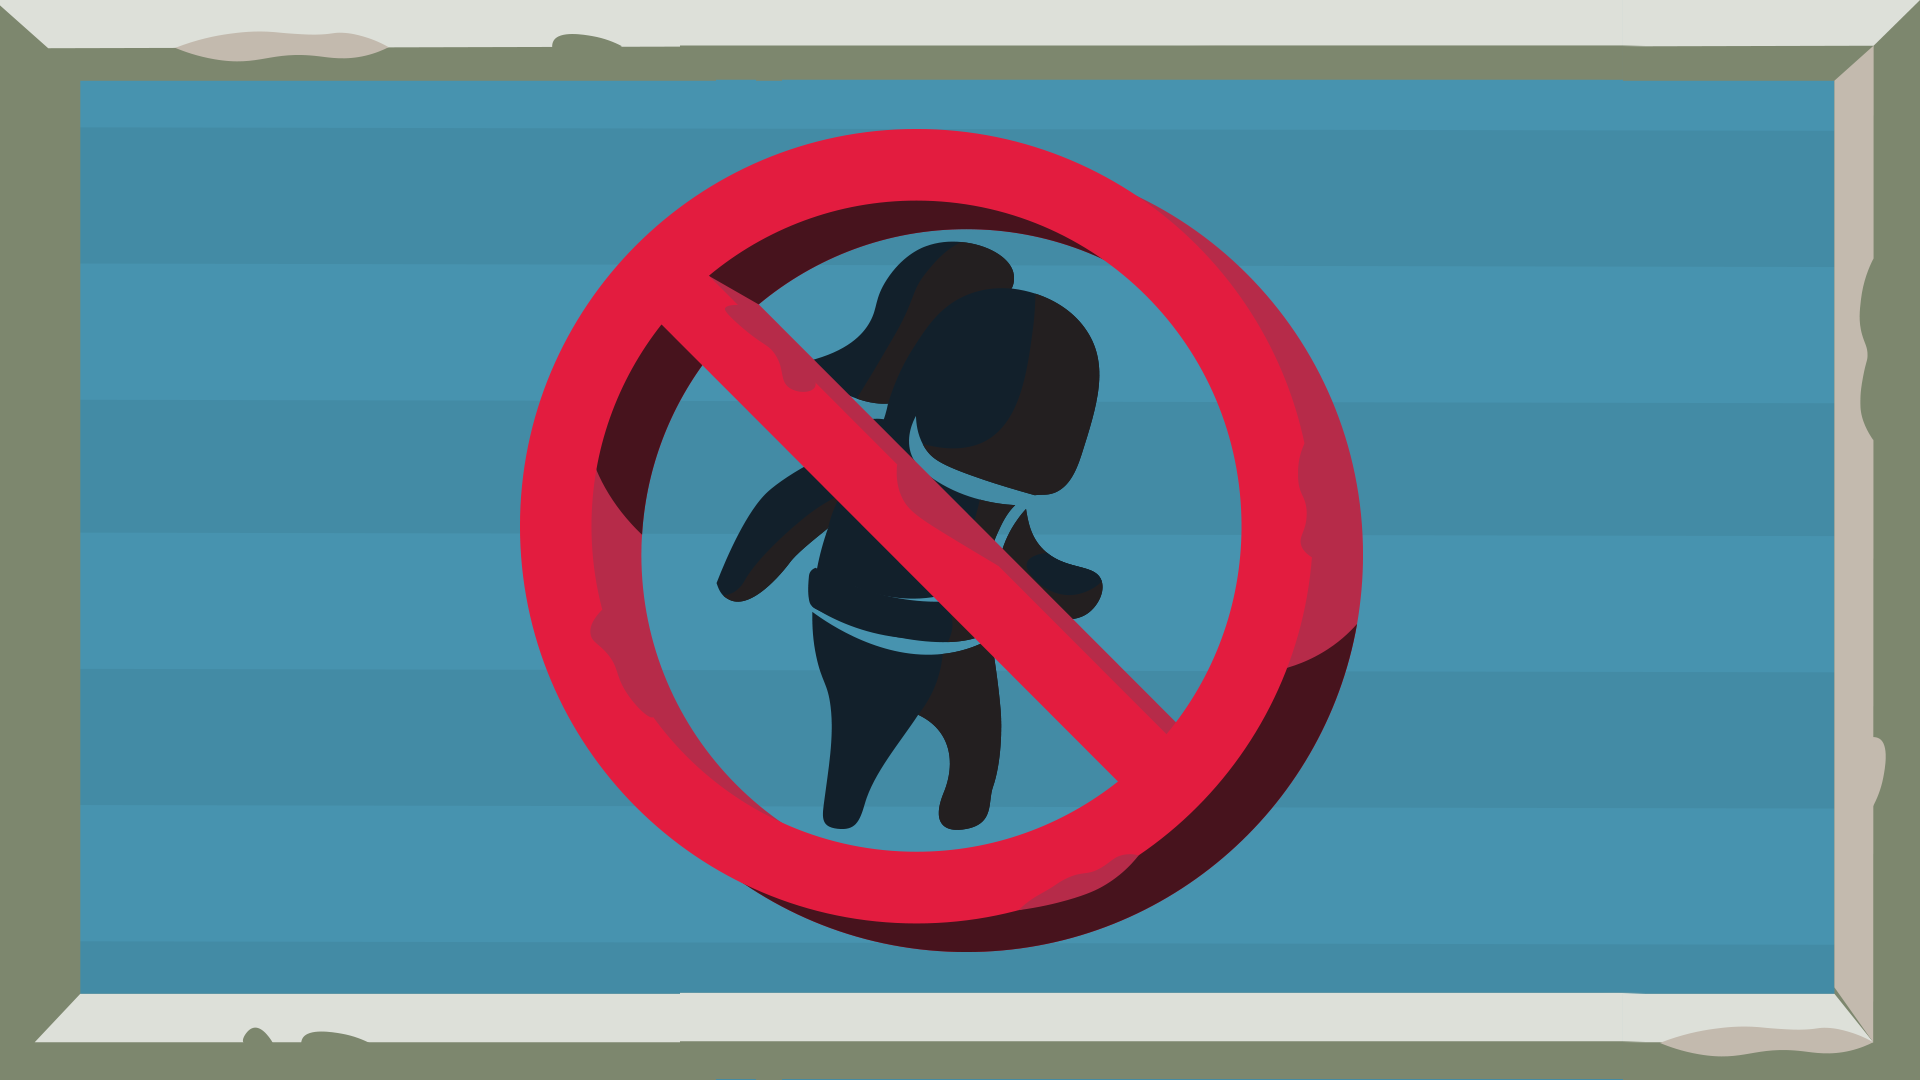 Icon for No unauthorized entry allowed